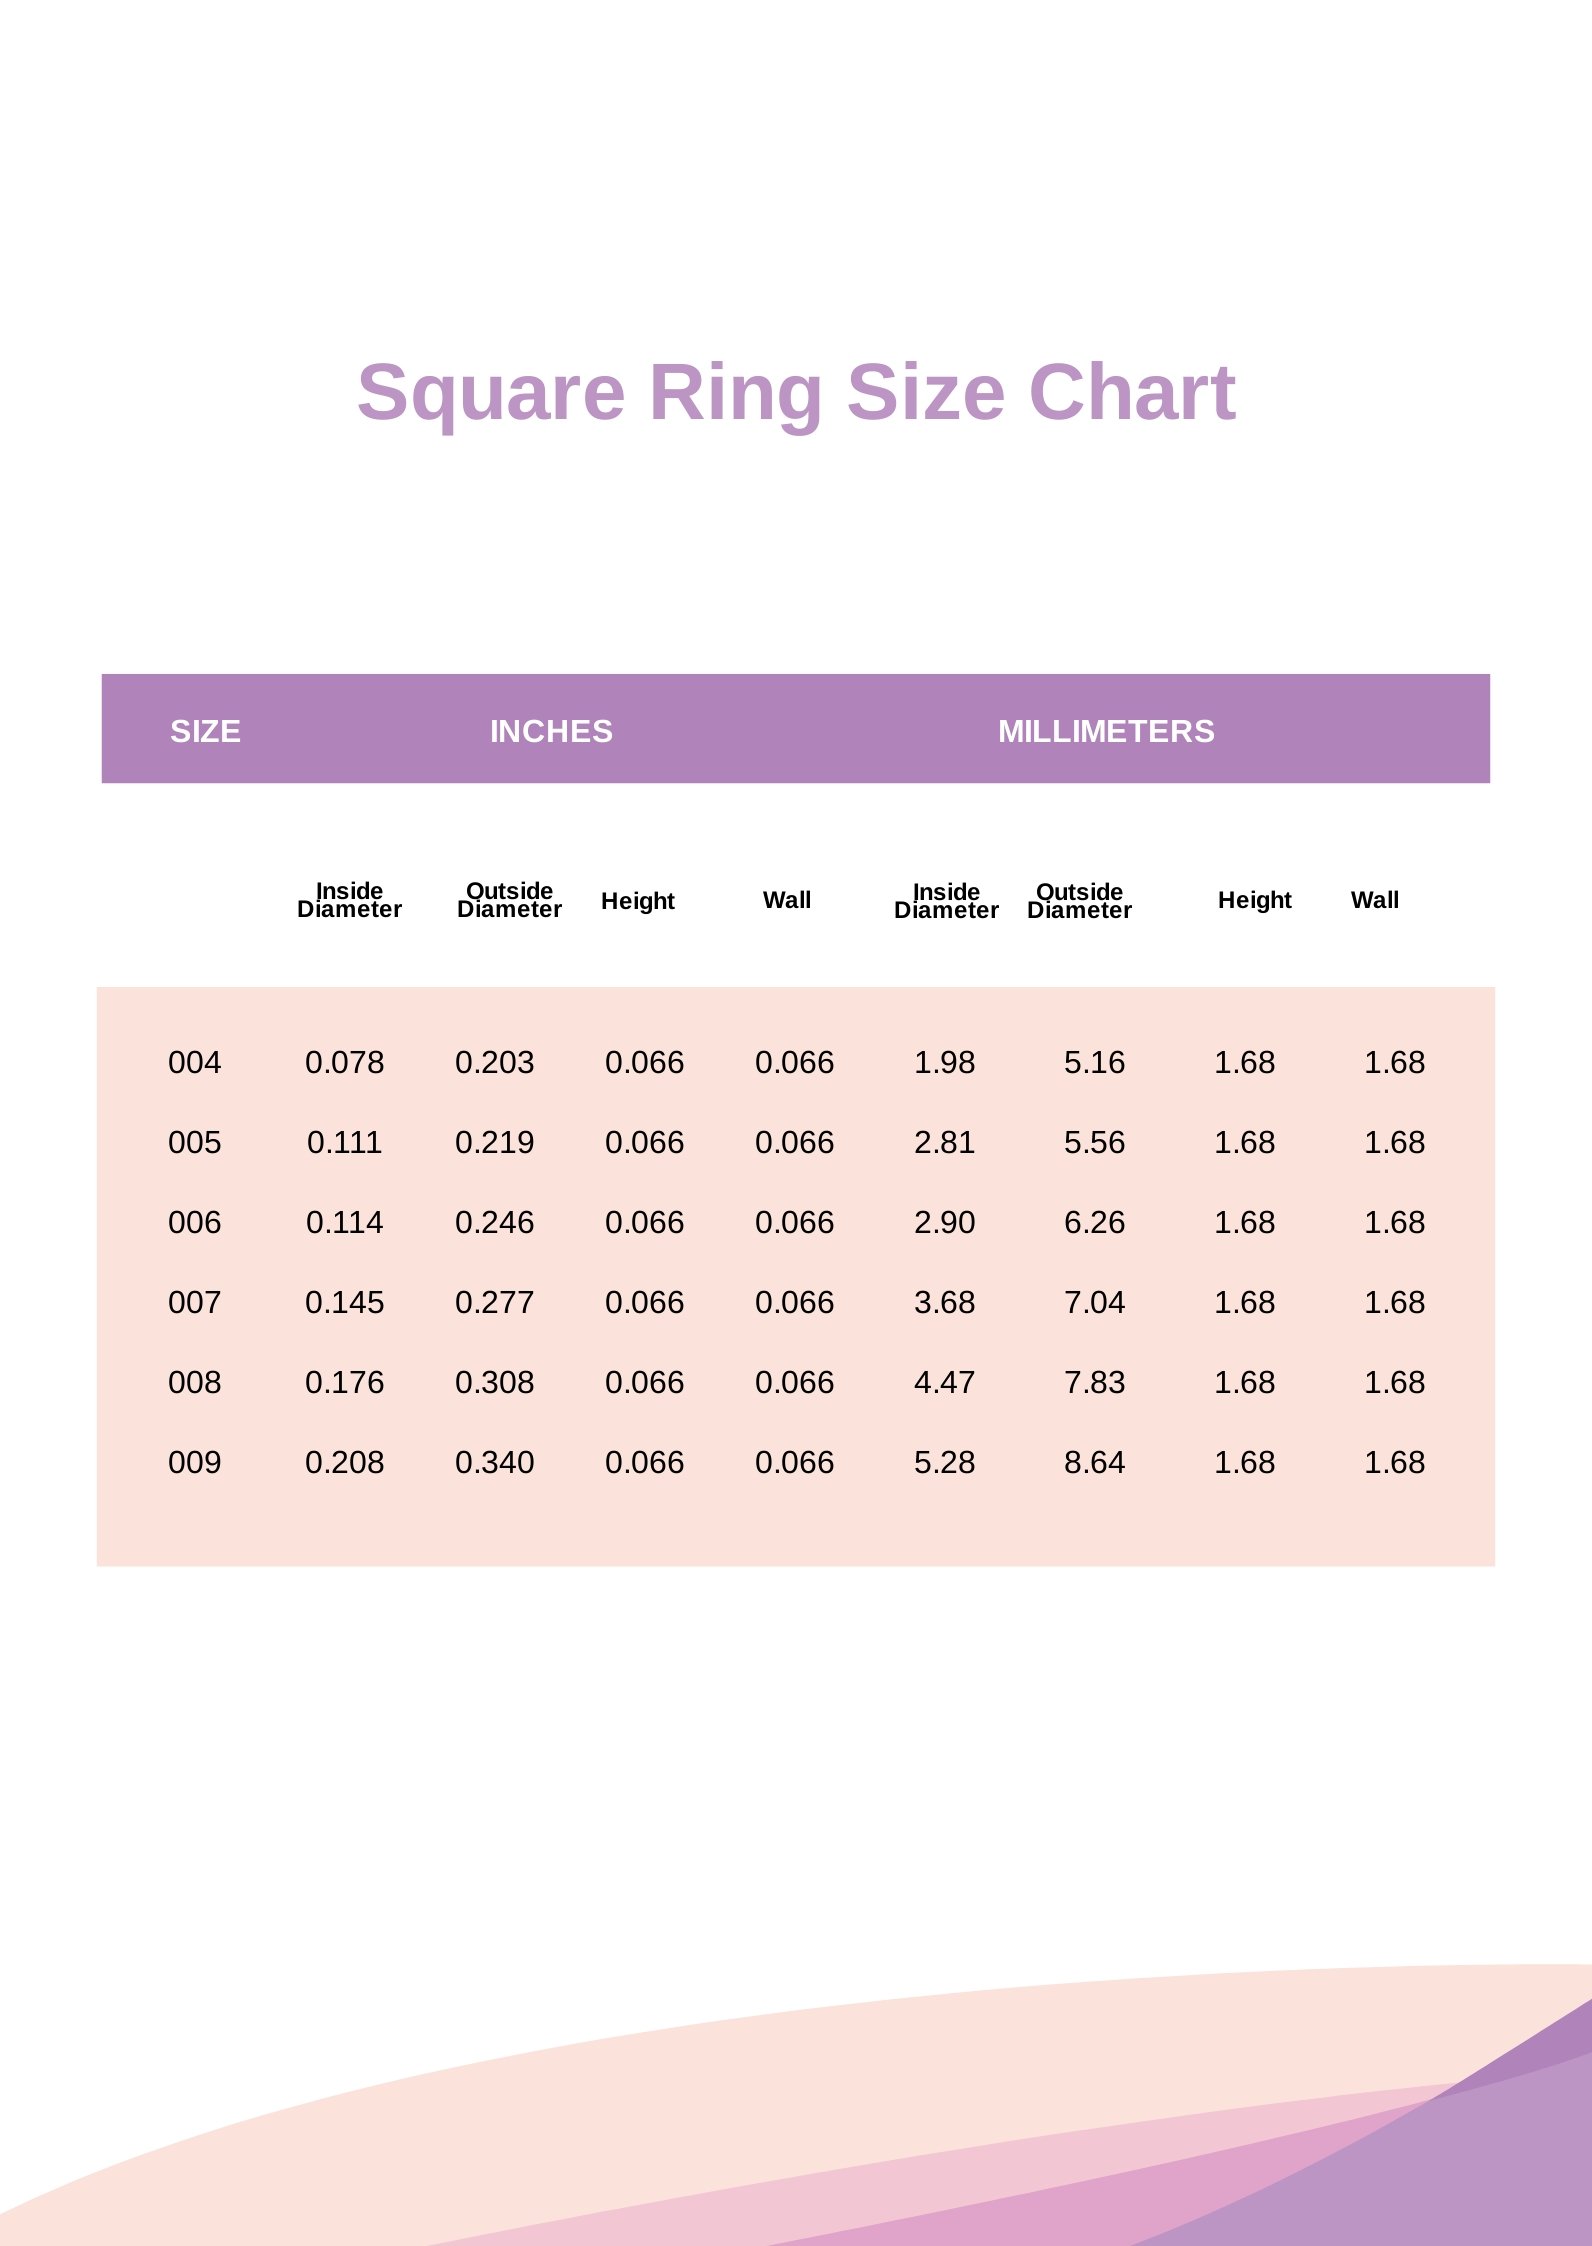 https://images.template.net/98816/free-square-ring-size-chart-79m7f.jpeg